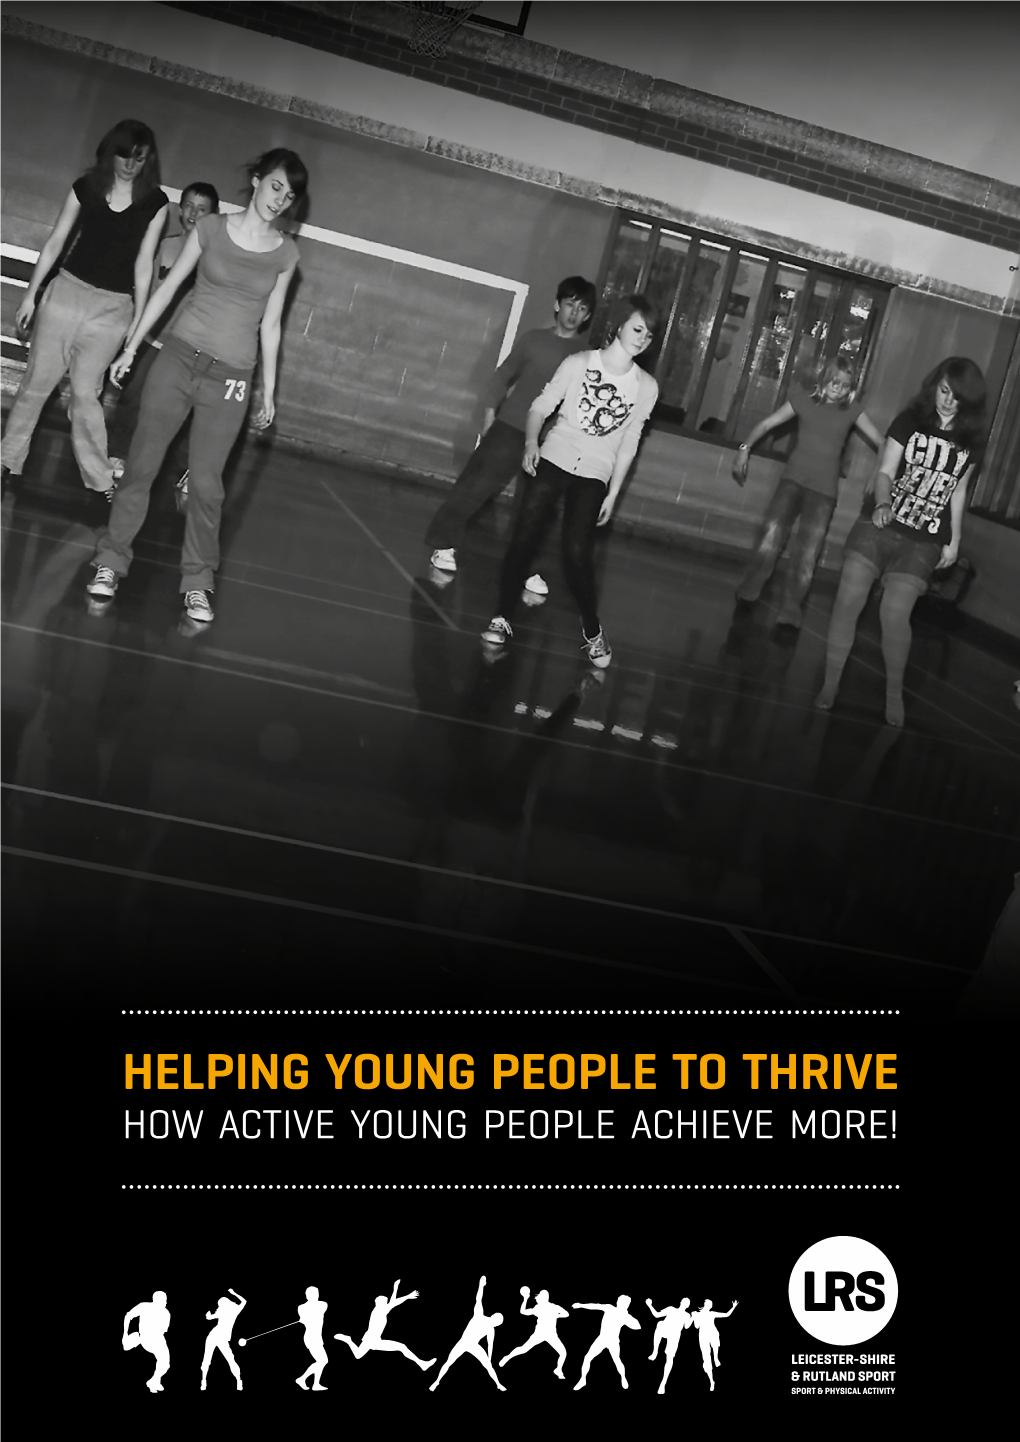 HELPING YOUNG PEOPLE to THRIVE HOW ACTIVE YOUNG PEOPLE ACHIEVE MORE! Helping Young People to Thrive - How Active Young People Achieve More!